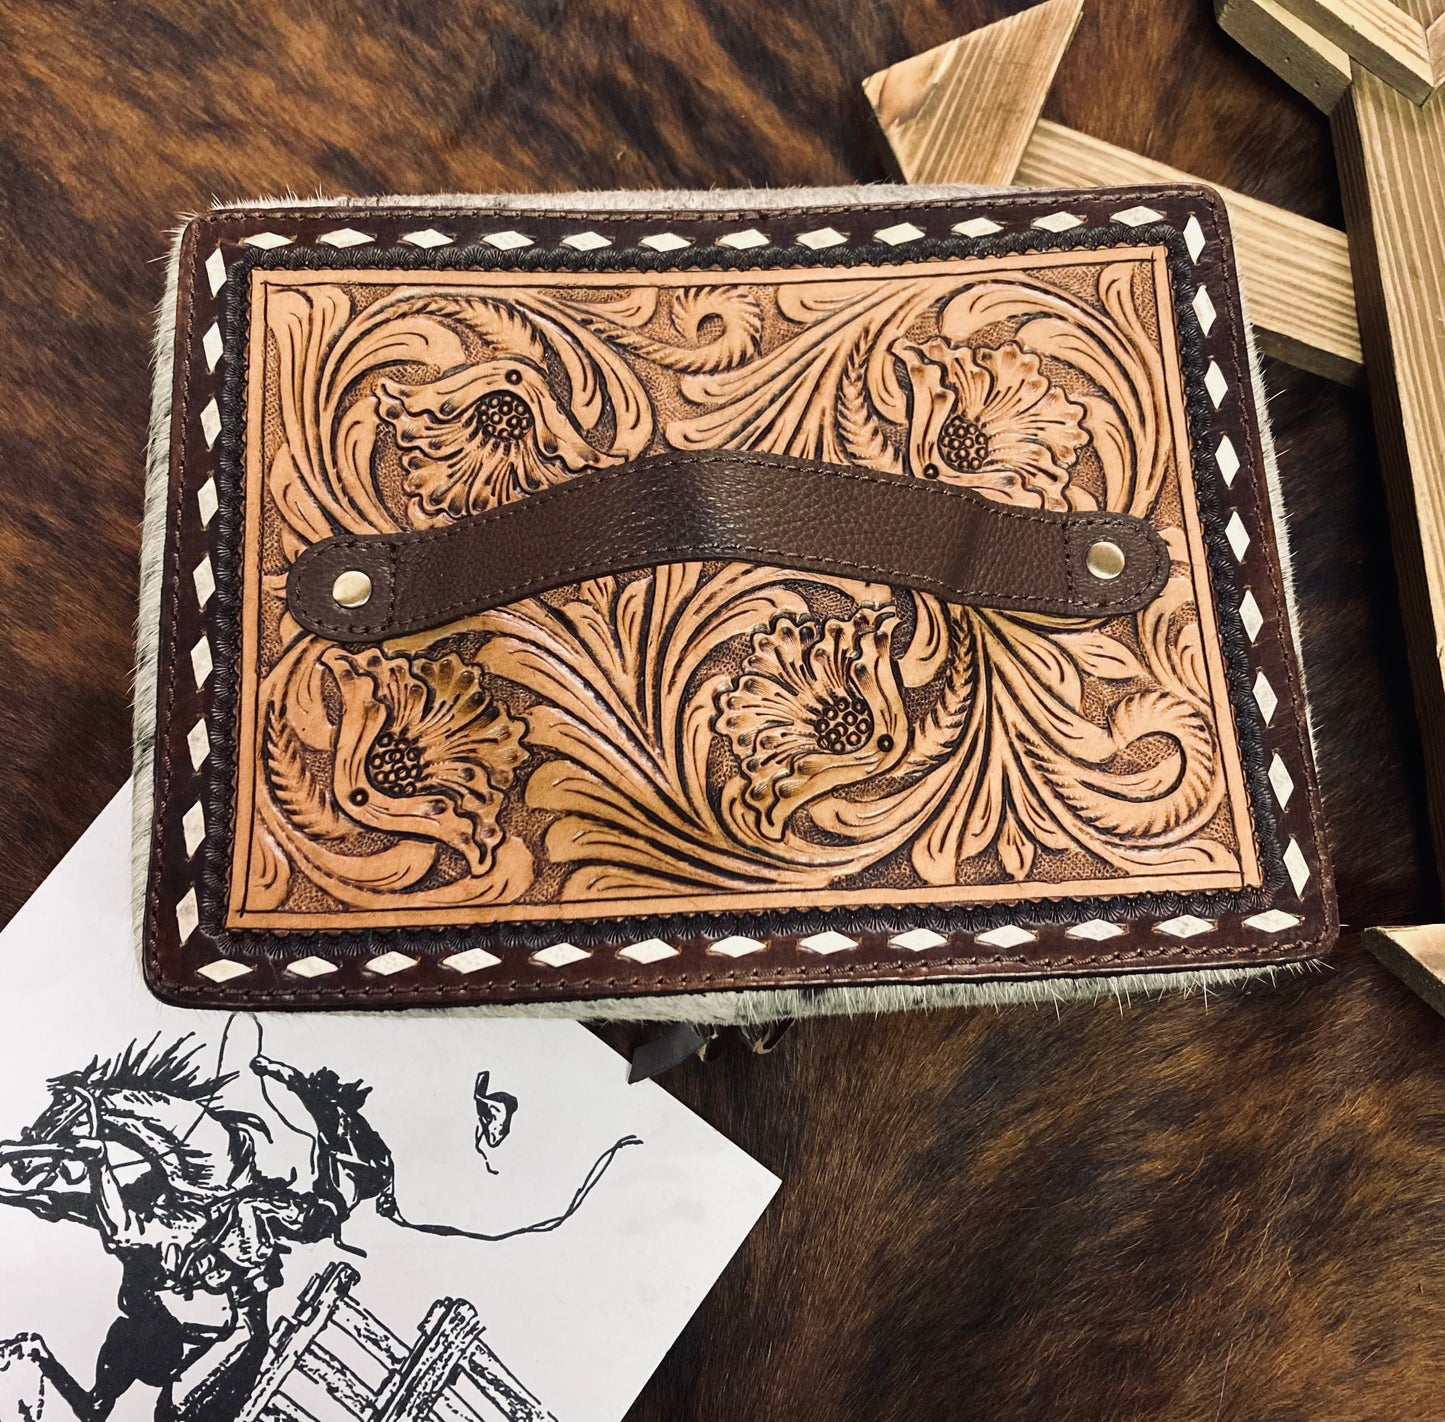 "Maverick" Cowhide & Tooled Leather Jewelry Case